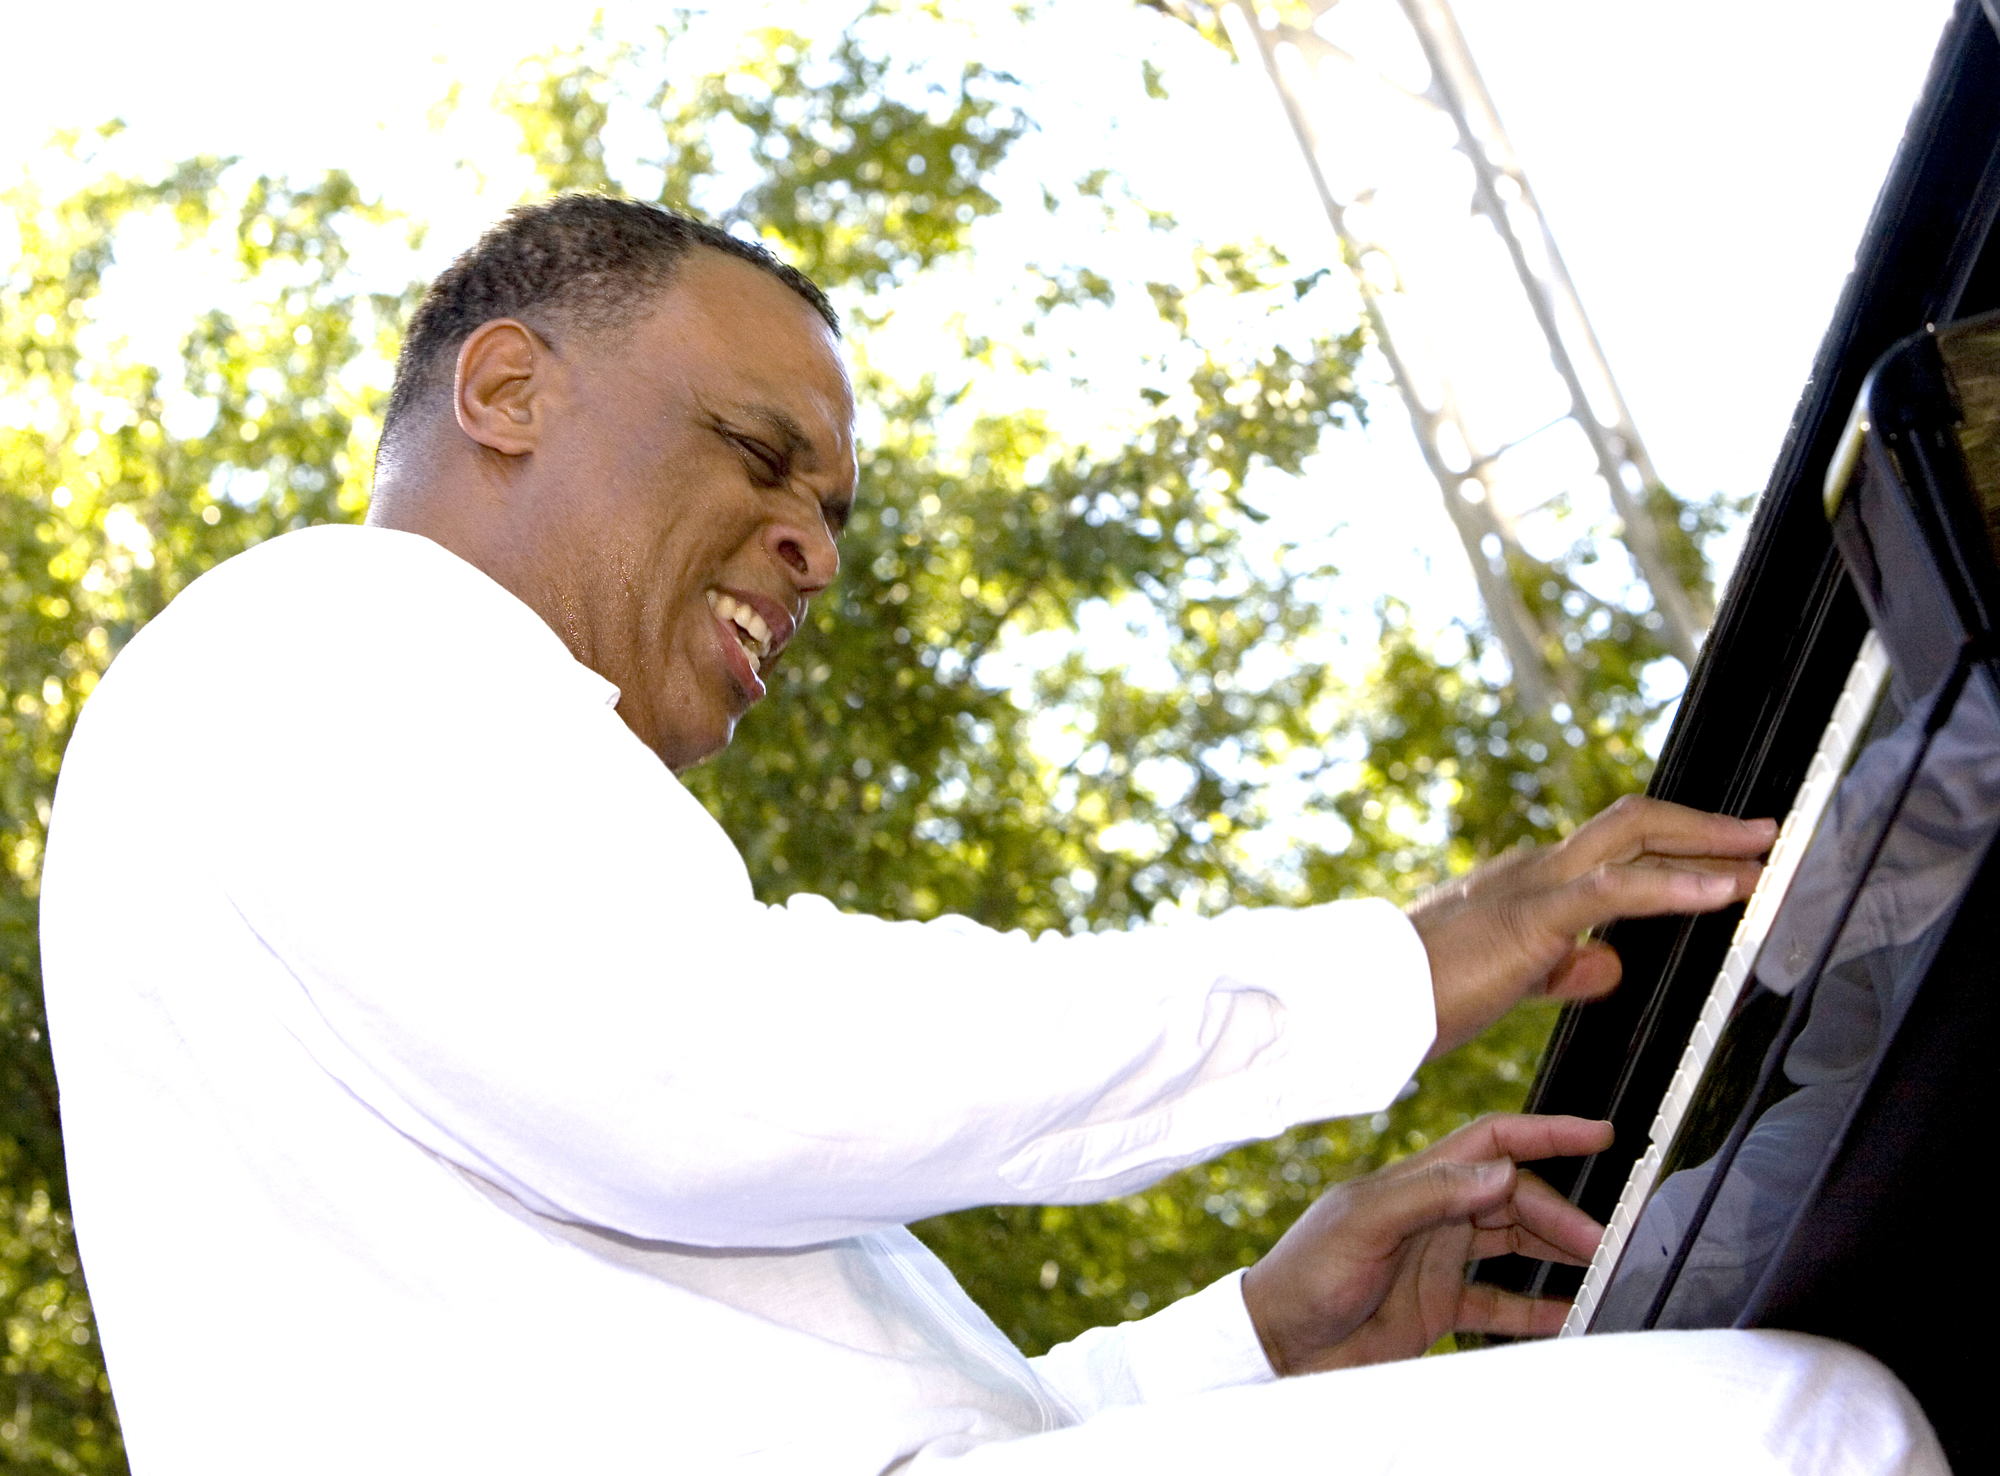 Cuban piano master Chuchito Valdés — son of Chucho Valdés and grandson of Beto Valdés — will hit the stage at Fogartyville for one night only. (Courtesy photo)